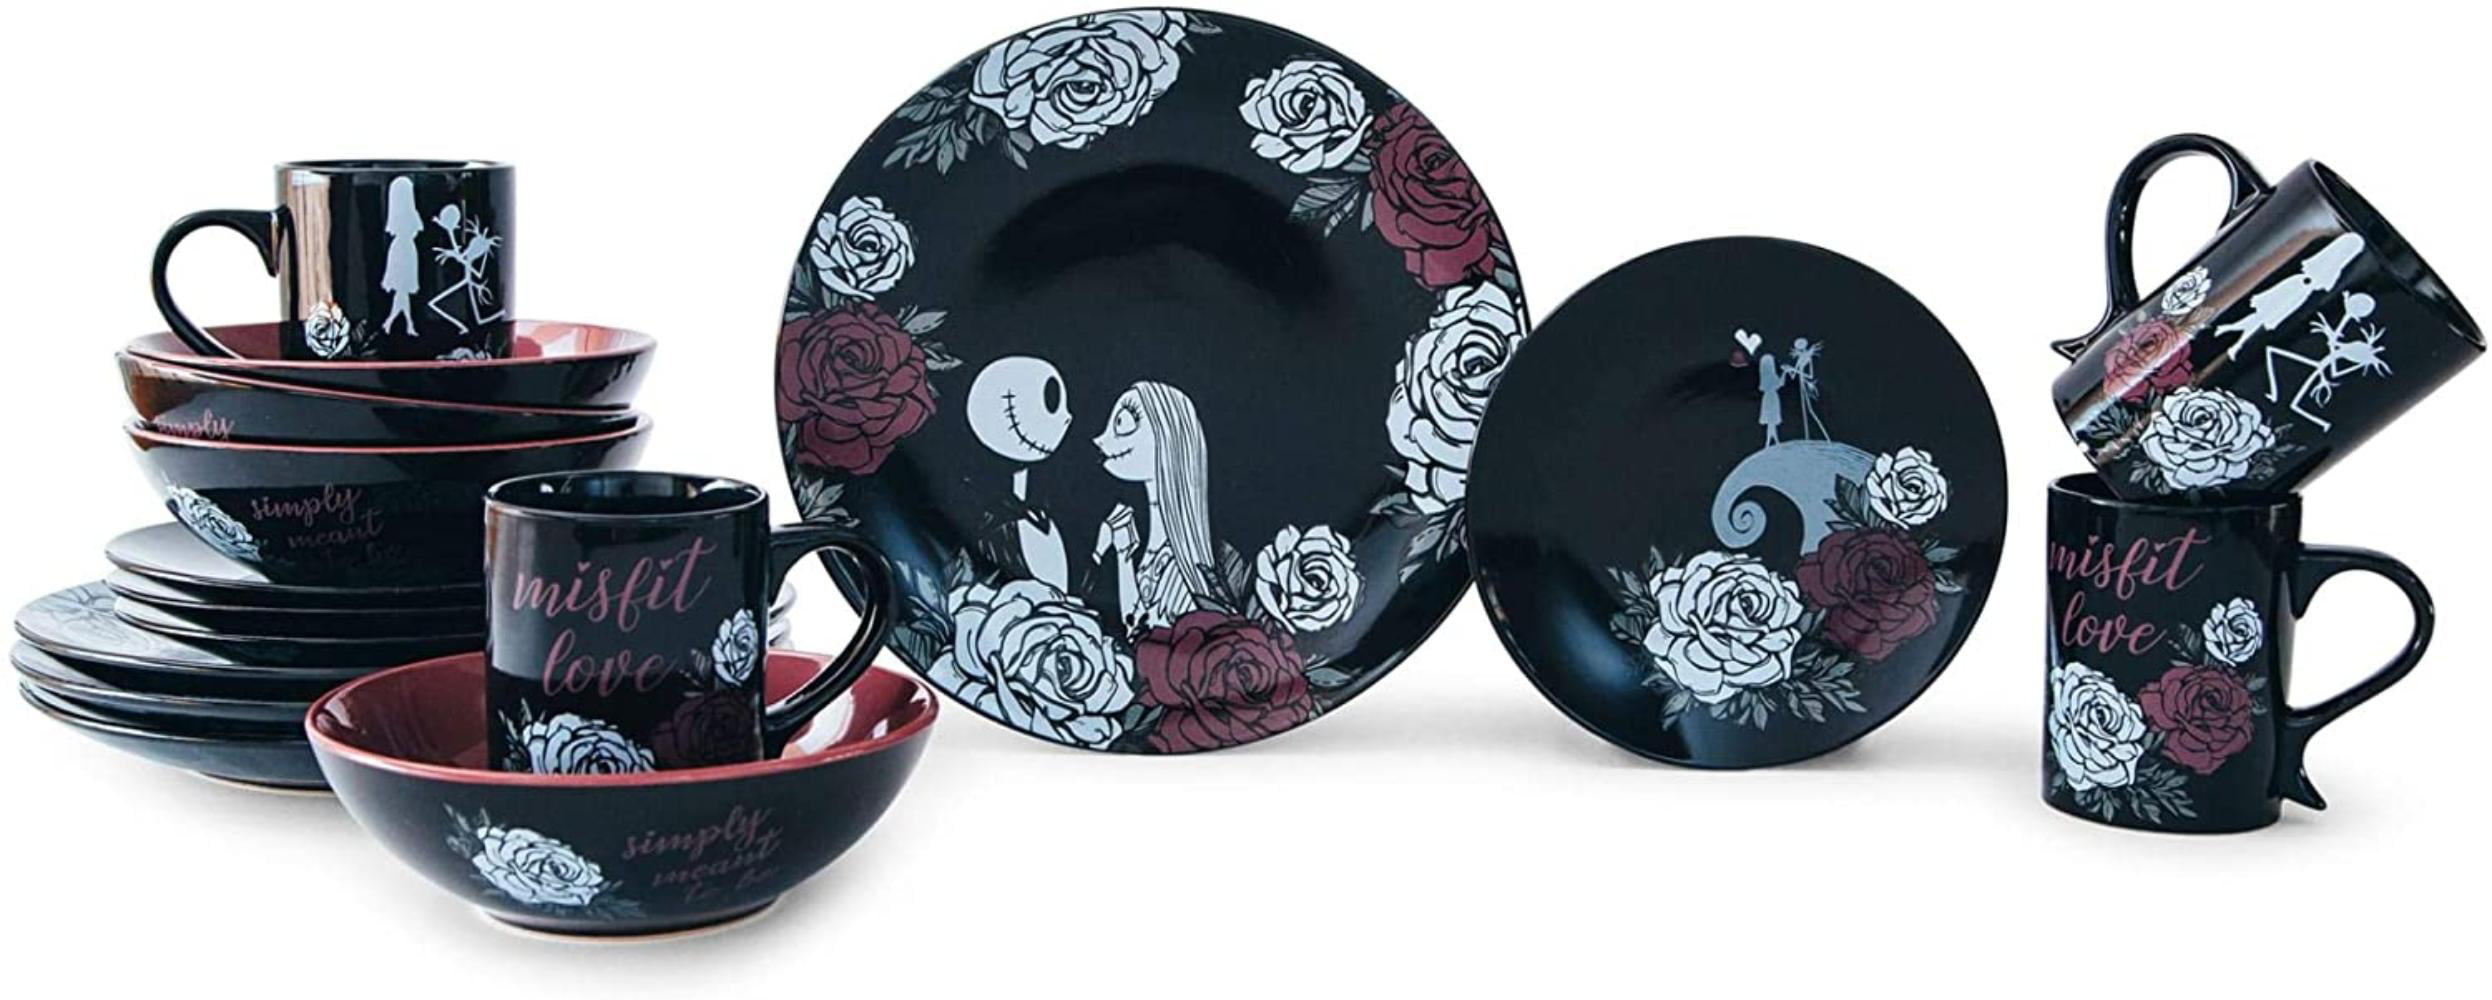 Mugs Place Setting for 4 Underground Toys The Nightmare Before Christmas Jack and Sally Black Rose Wedding 16-Piece Dinnerware Set Soup Bowls Includes Dinner and Salad Plates